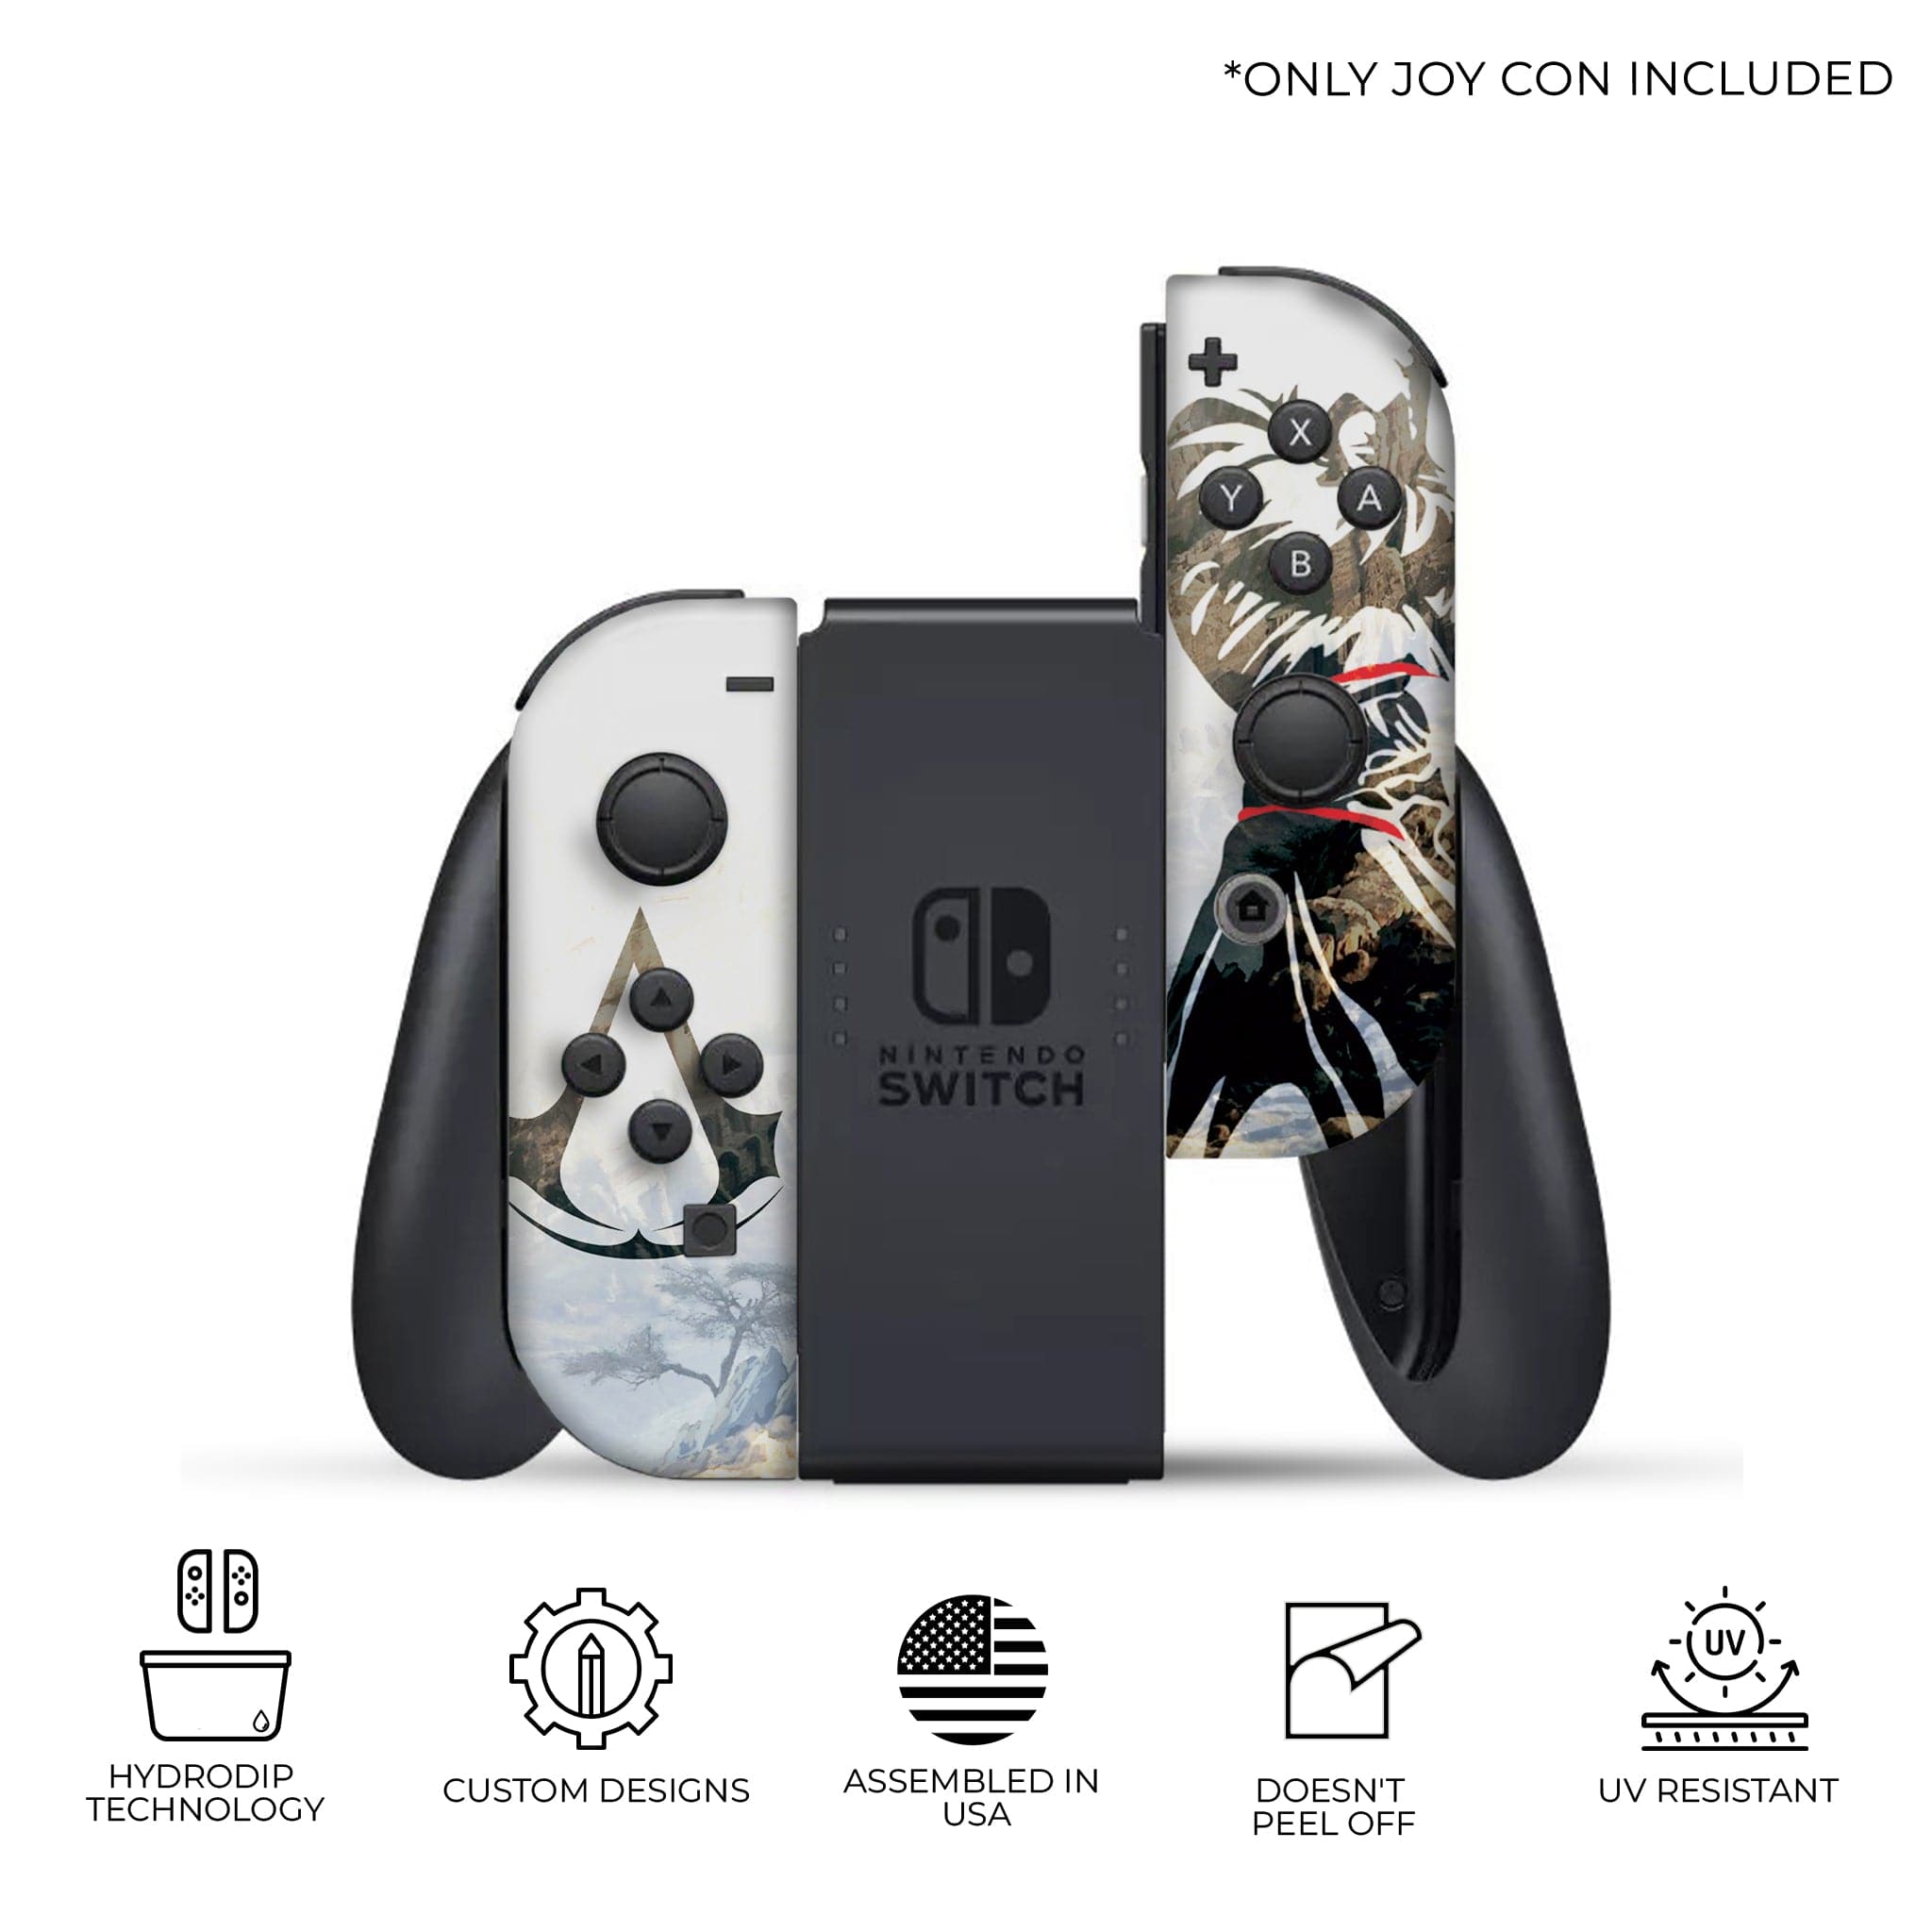 Assasin's Creed Inspired Nintendo Switch Joy-Con Left and Right Switch Controllers by Nintendo